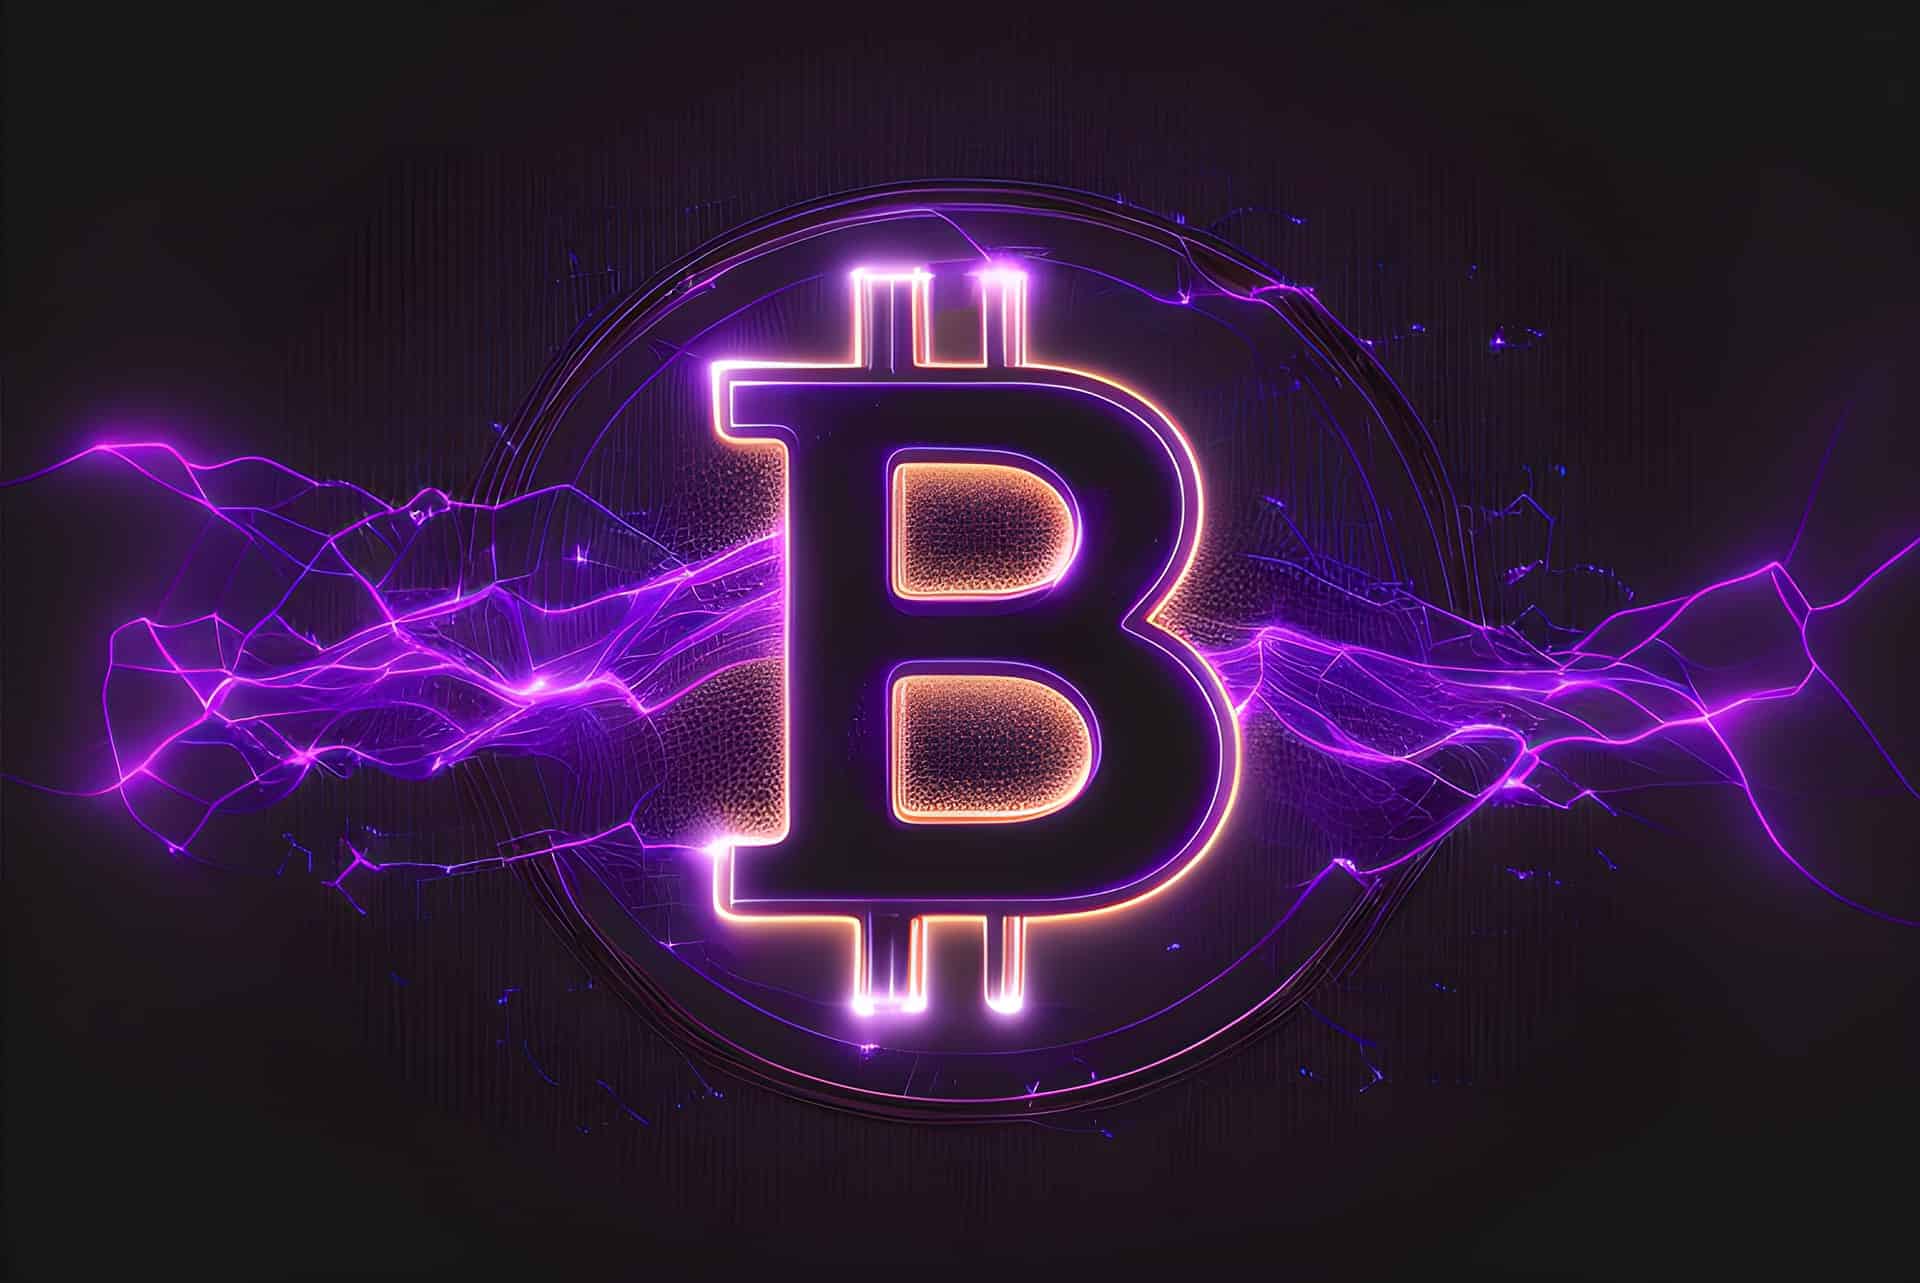 Binance To Enable Bitcoin Lightning Network After Withdrawals Woes